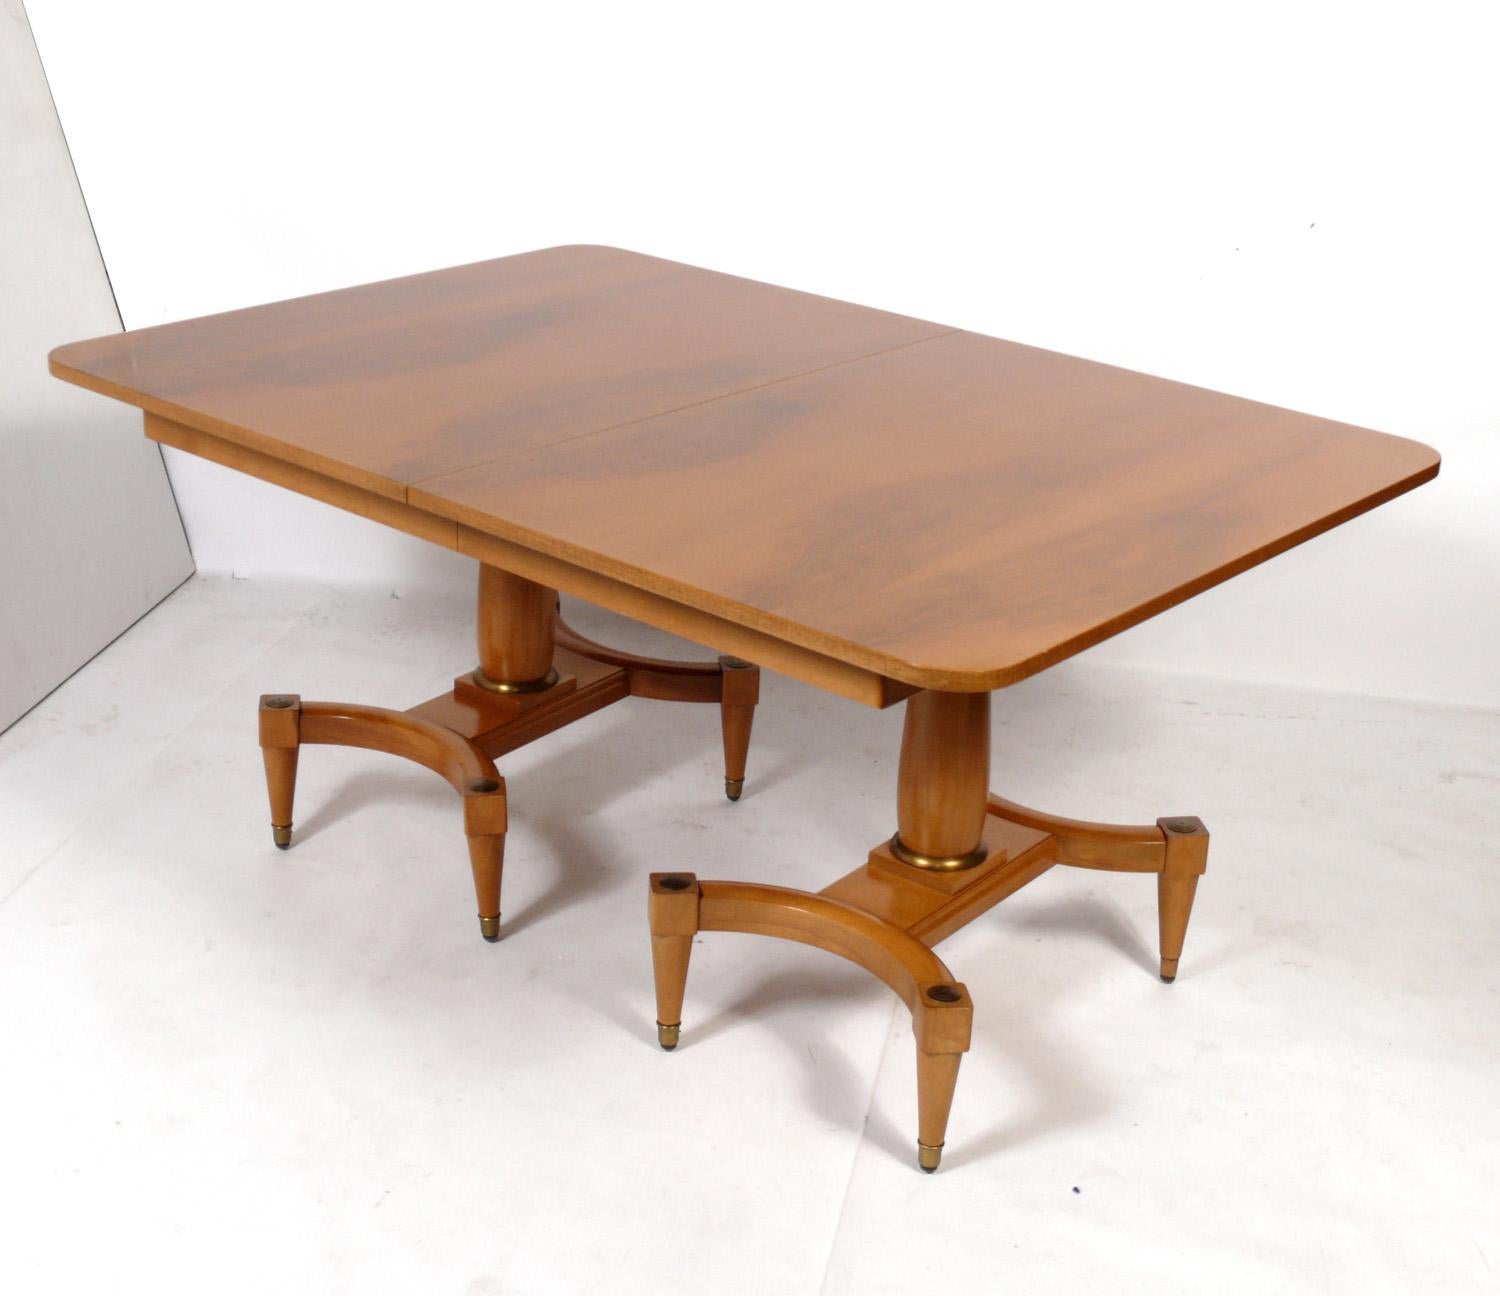 Elegant Hollywood Regency dining table, in the manner of Tommi Parzinger, American, circa 1950s. Retains warm original patina to both the wood and brass elements.